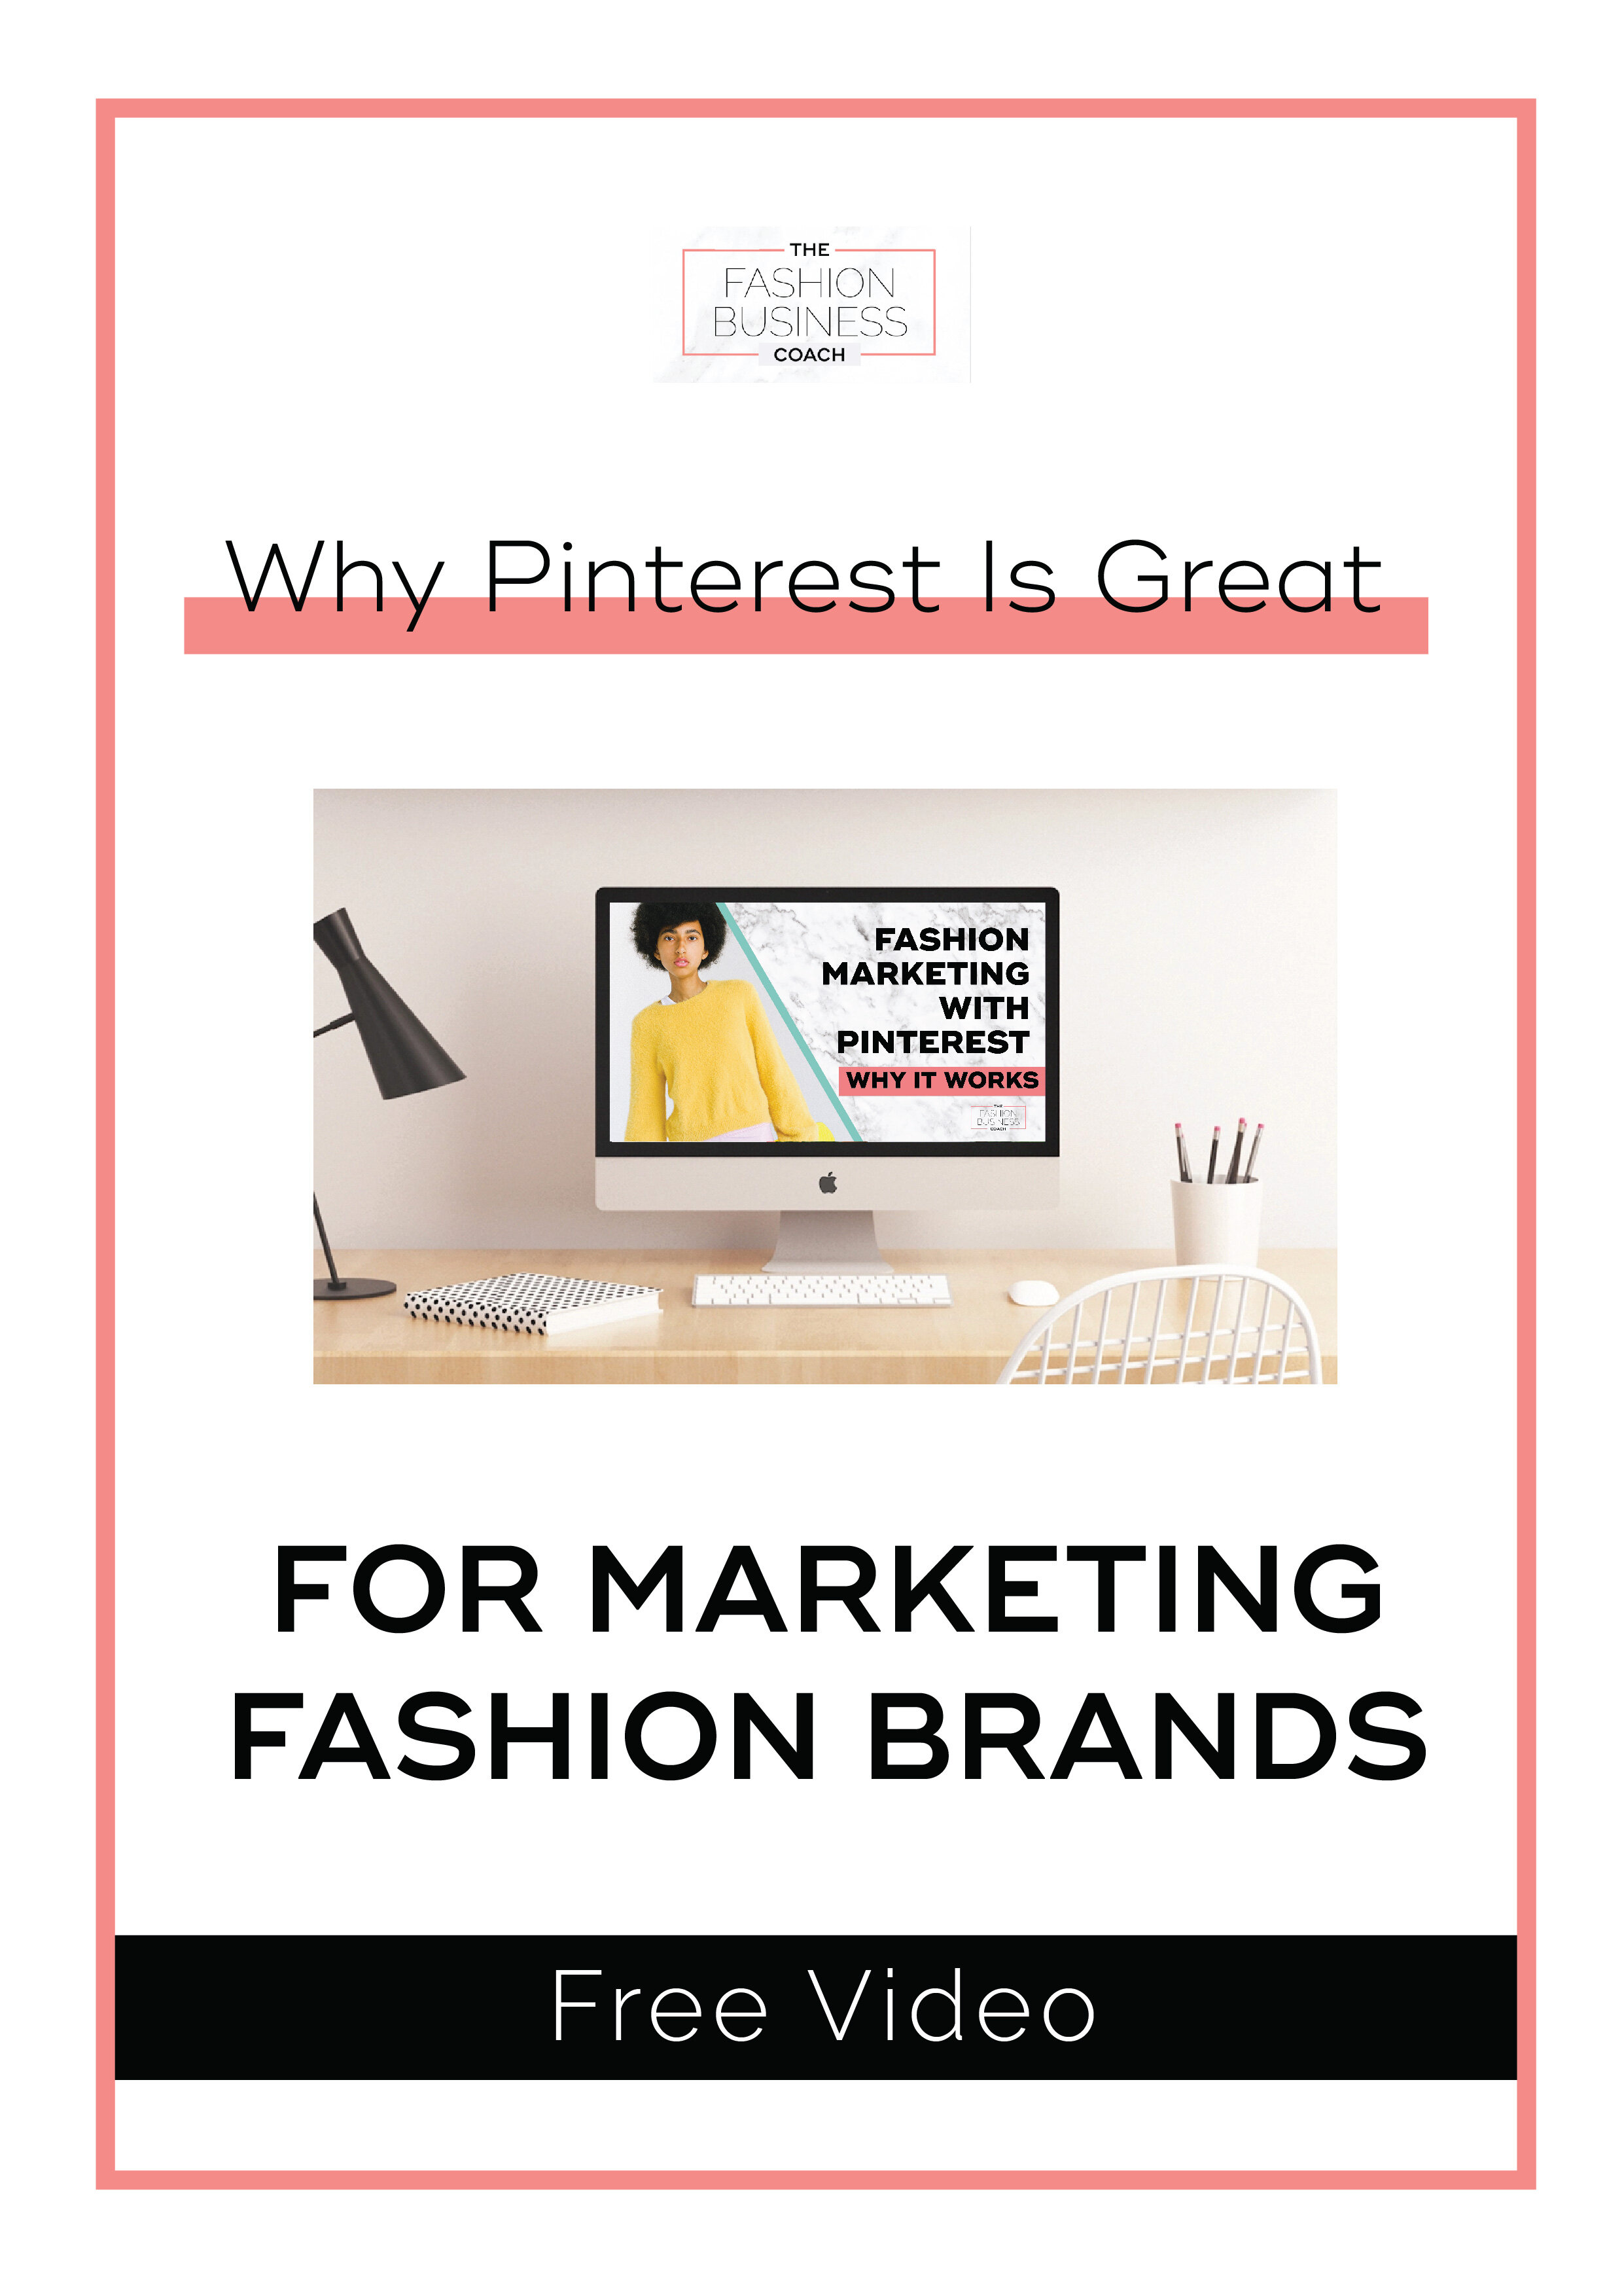 Why Pinterest Is Great For Marketing Fashion Brands2.jpg